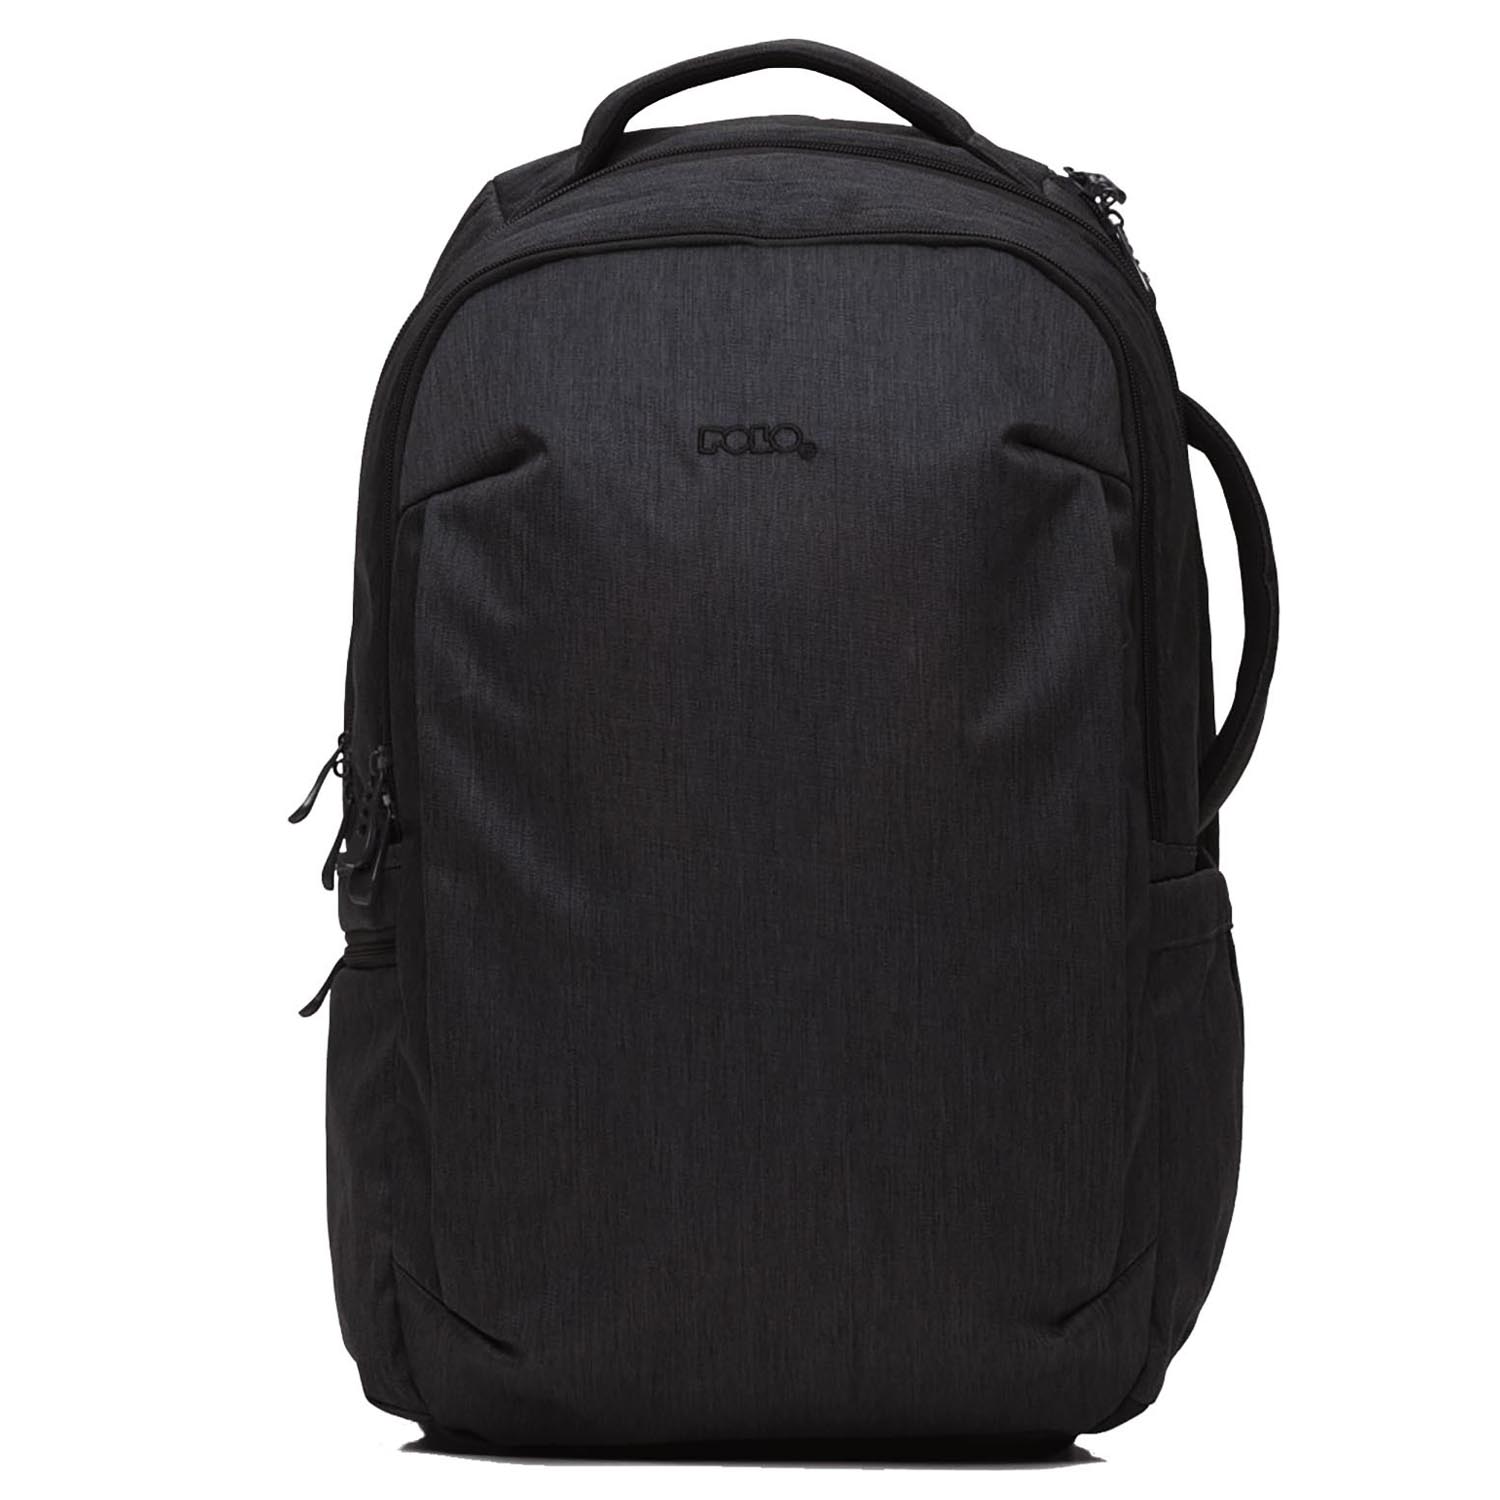 polo stric backpack black 902021 2000 1